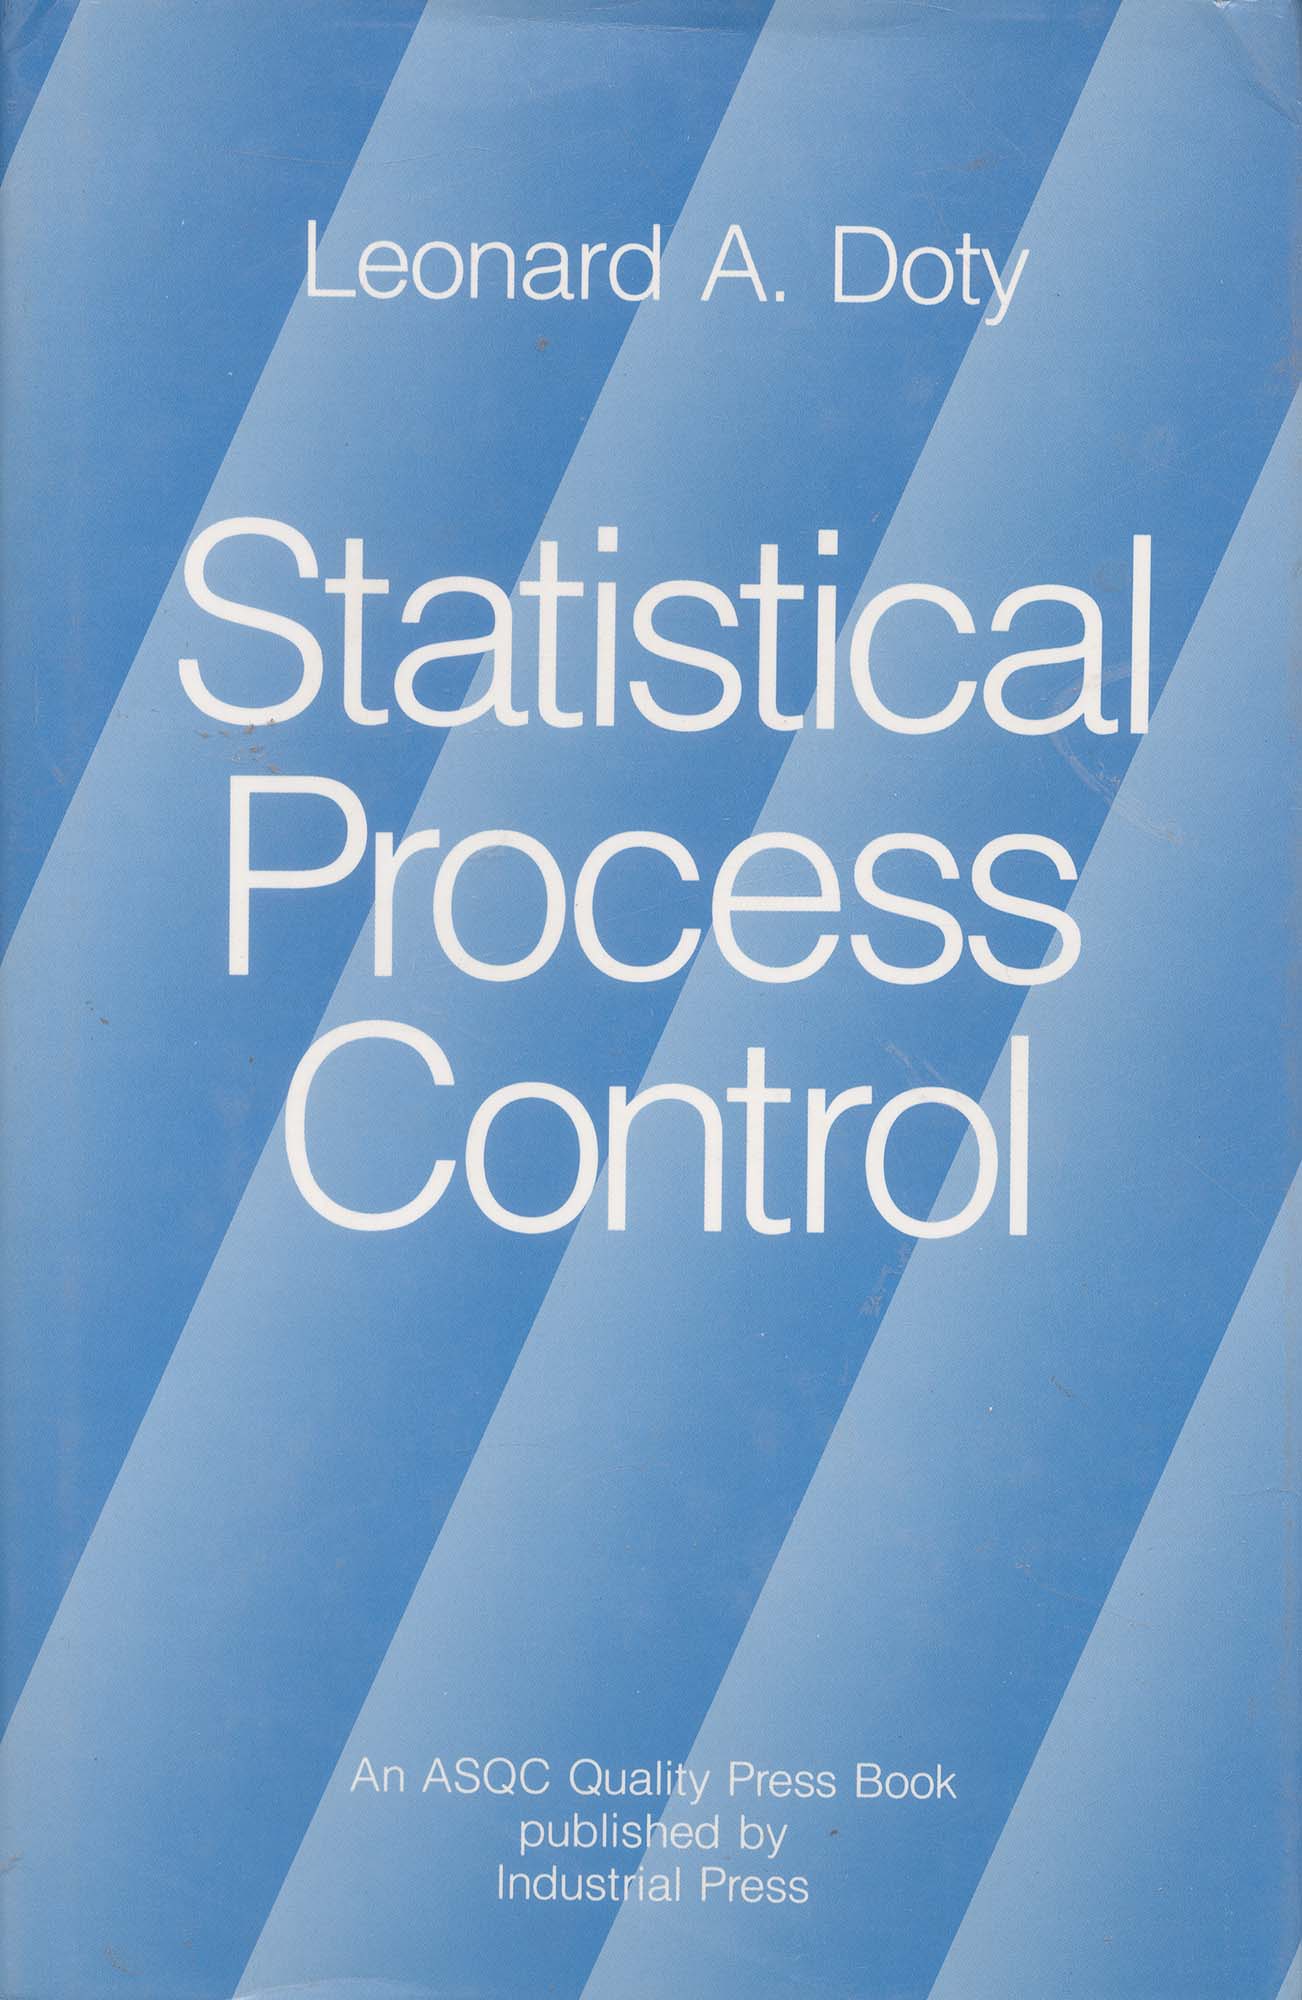 literature review on statistical process control